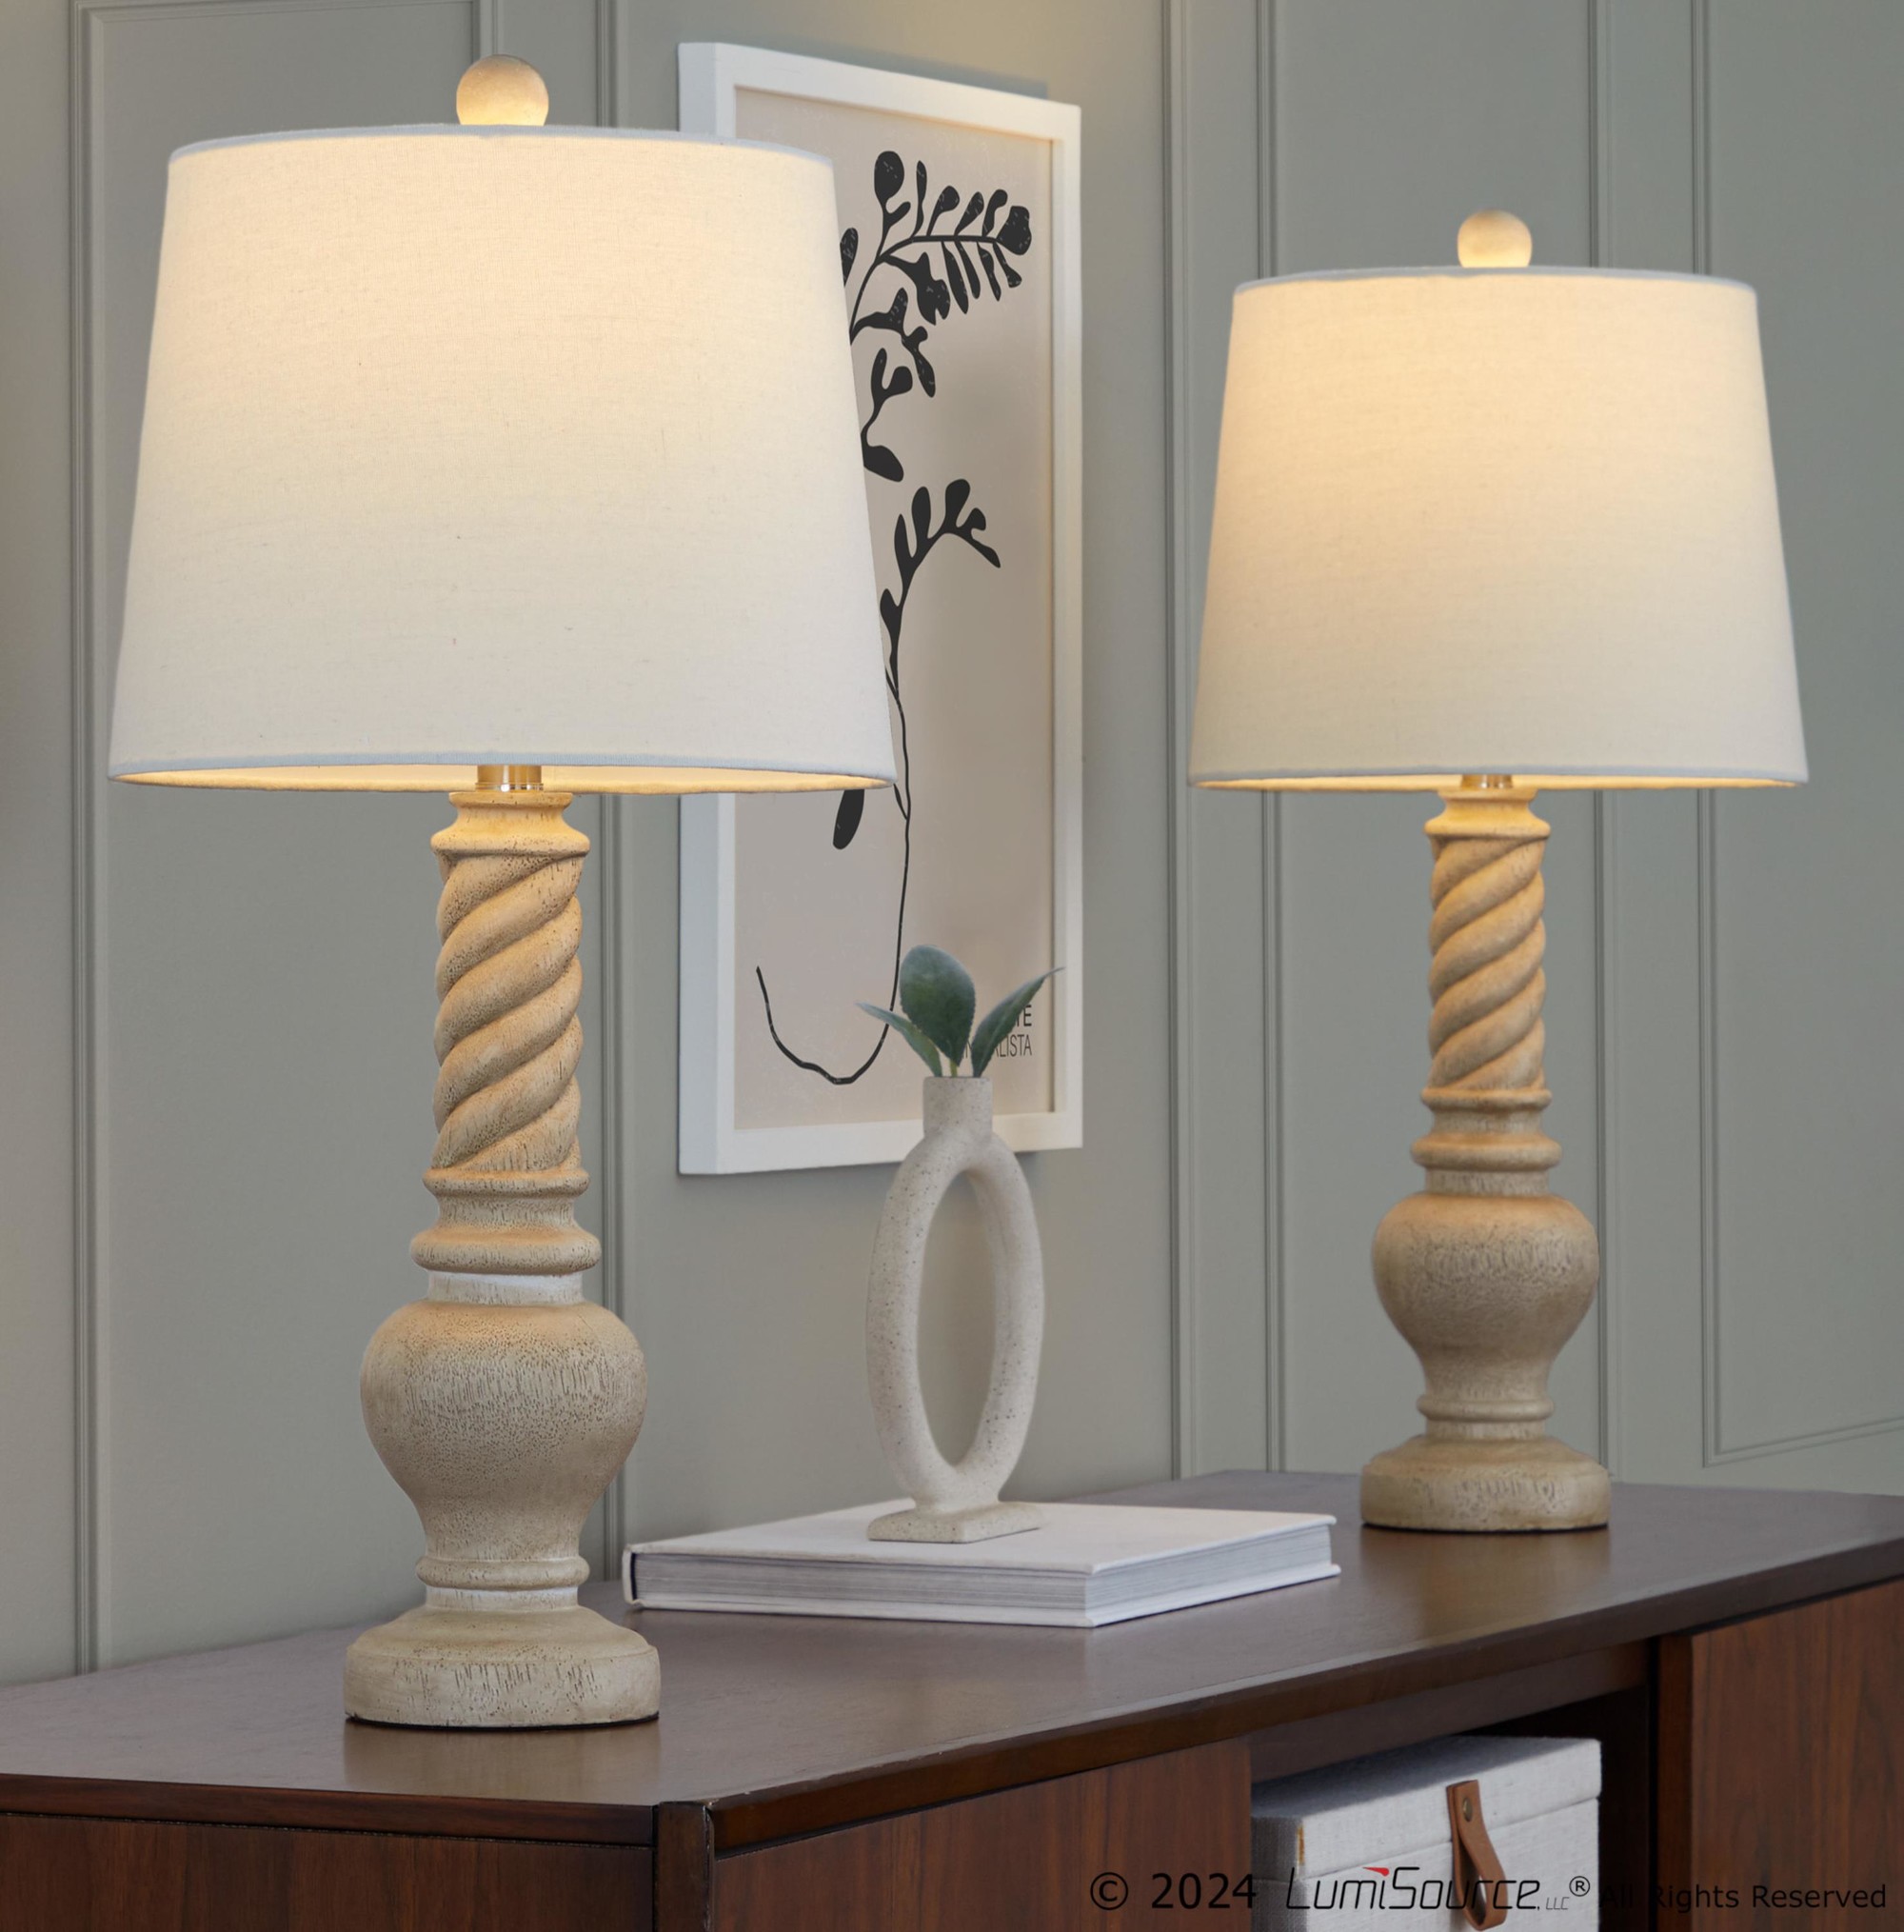 Post 25.75" Polyresin Table Lamp - Set Of 2